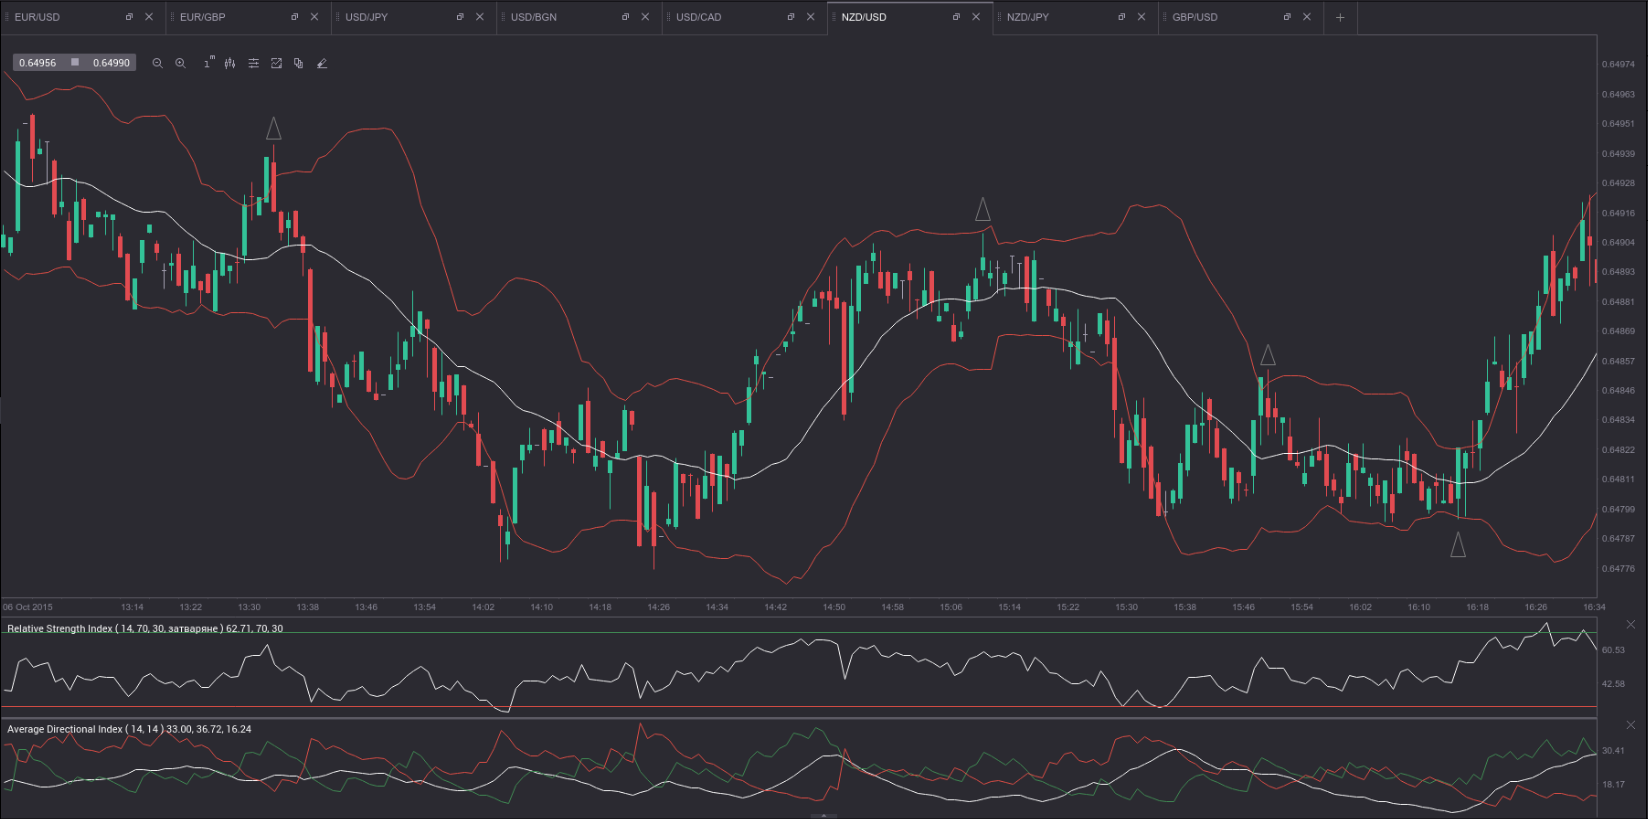 Binary options and bollinger bands